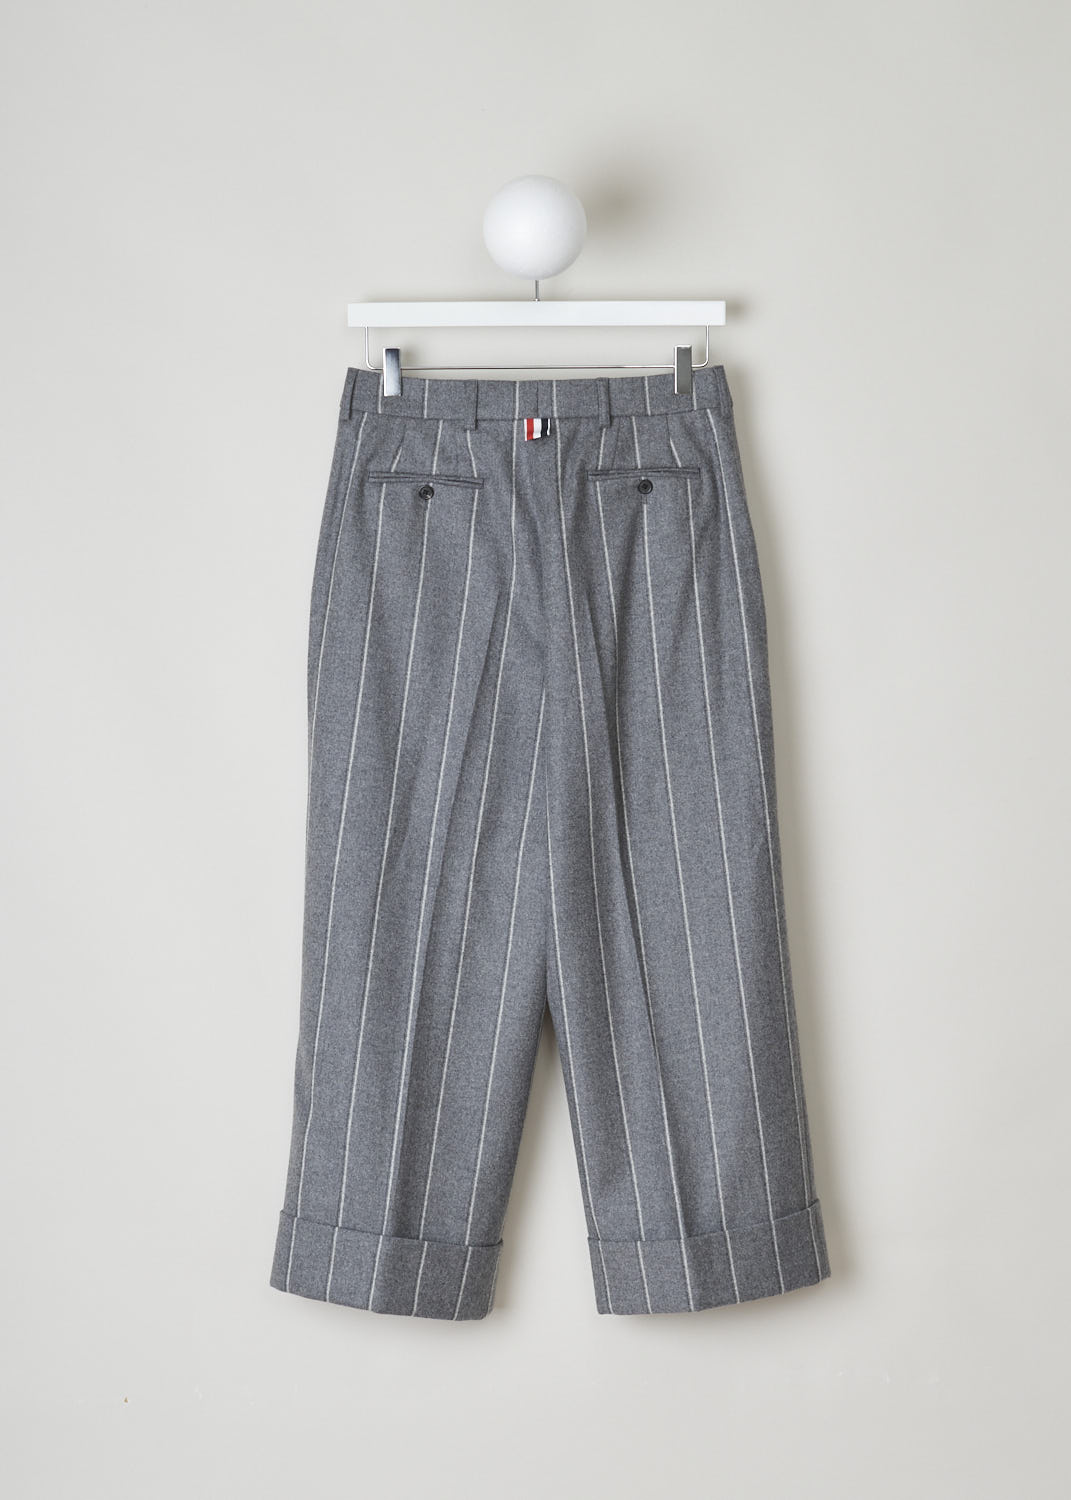 THOM BROWNE, WOOL FLANNEL STRIPED TROUSERS, FTC160A_05019_035_MED_GREY, Grey, Print, Back, These heather grey, striped trousers have belt loops and a clap a zip closure They feature slanted pockets in the front and buttoned welt pockets in the back. The pant legs end in broad, folded hem. 
